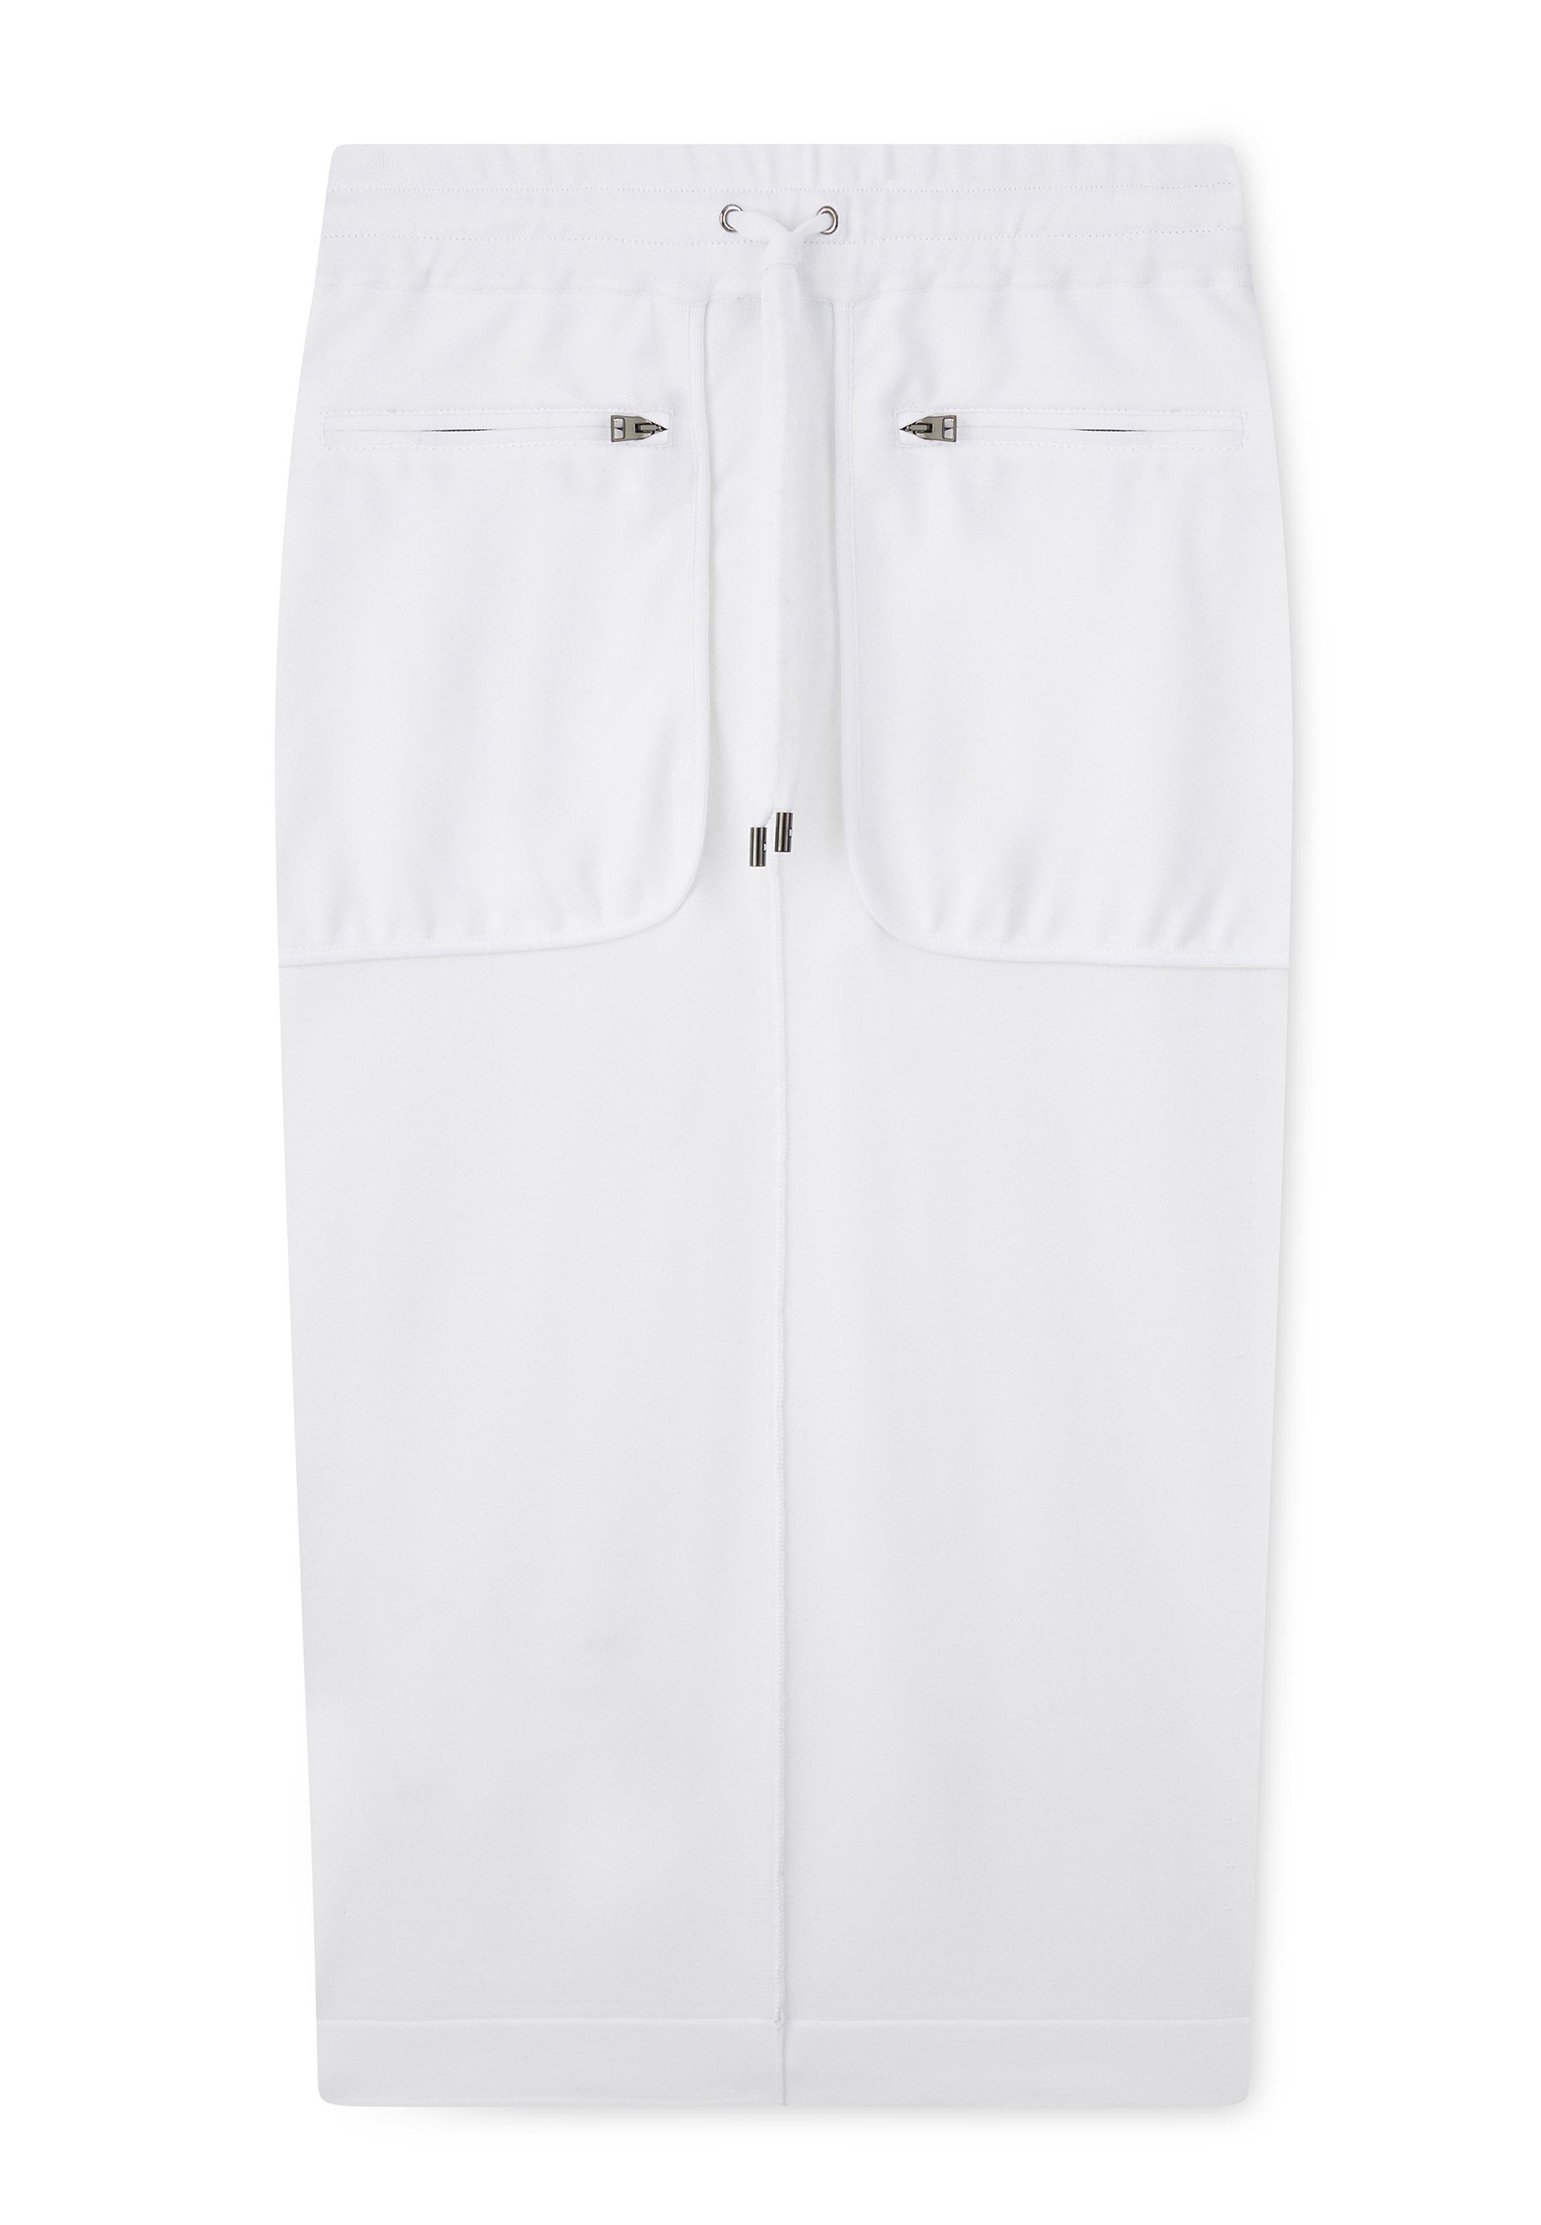 Skirt TOM FORD Color: white (Code: 571) in online store Allure